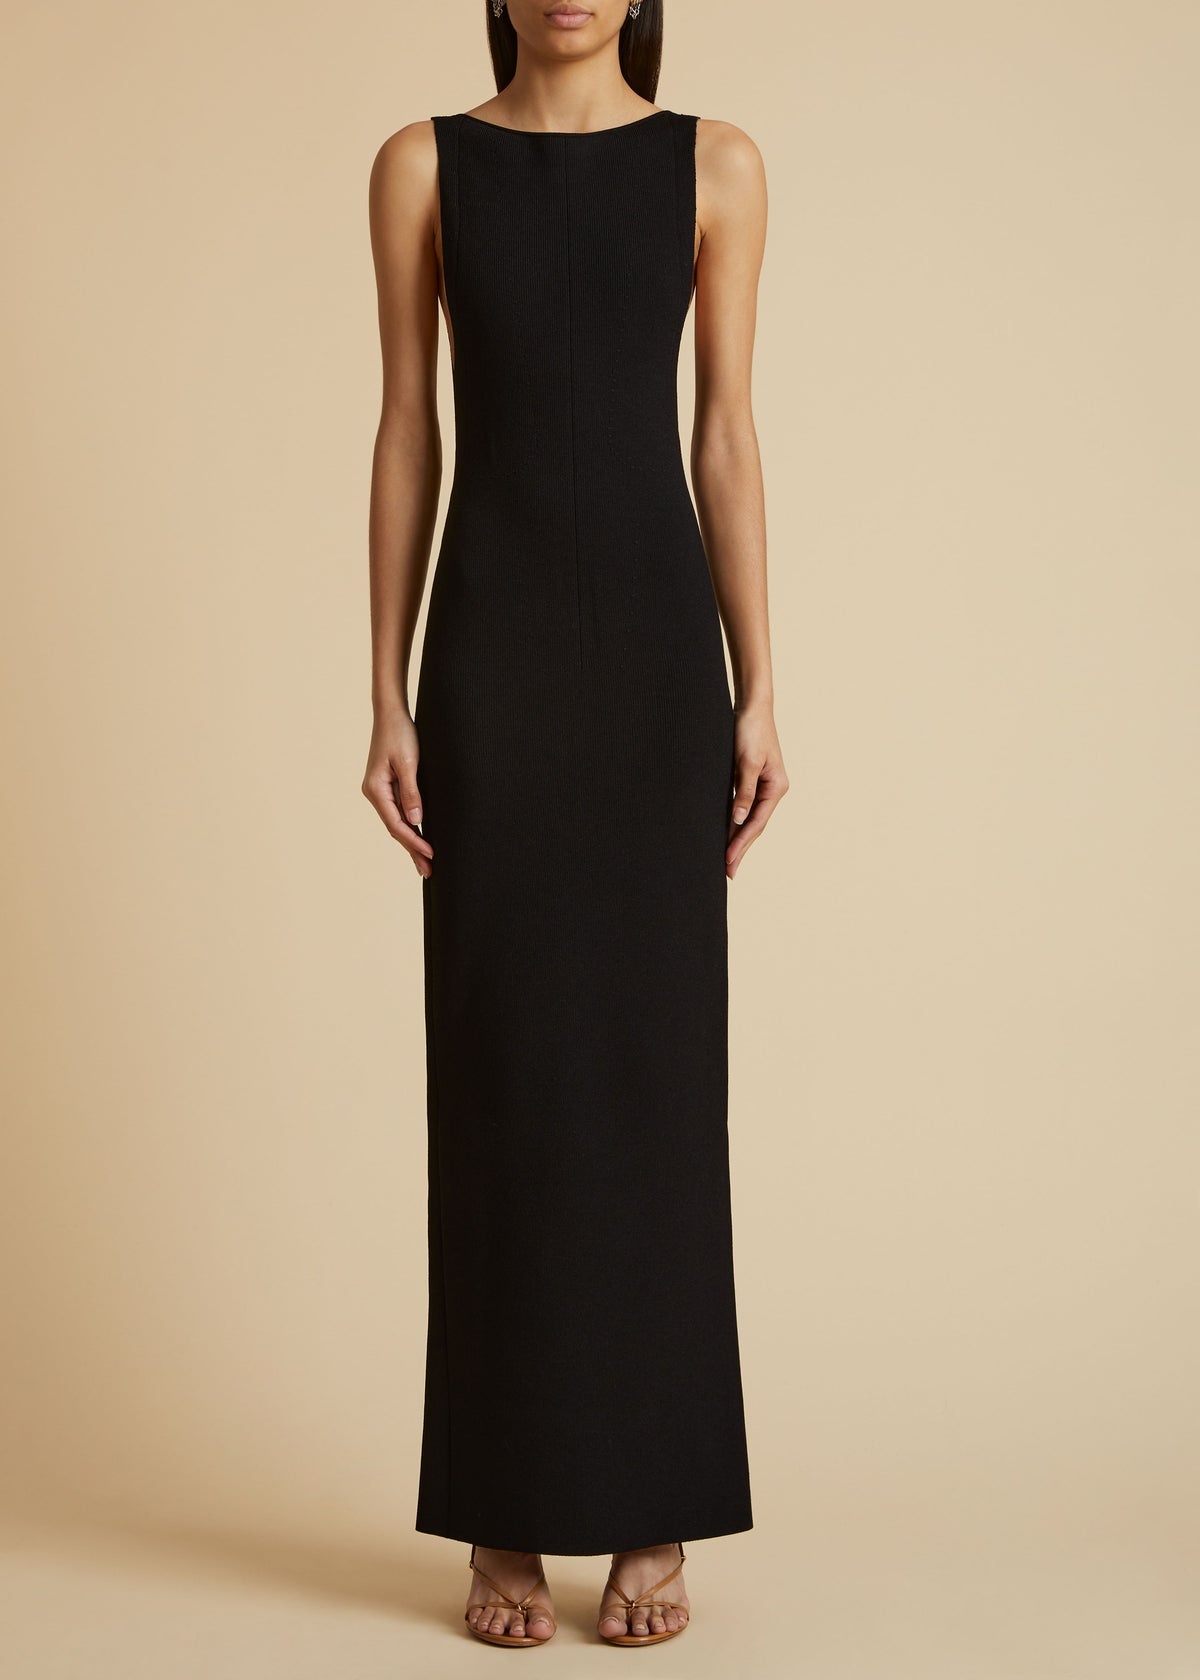 The Evelyn Dress in Black - 2